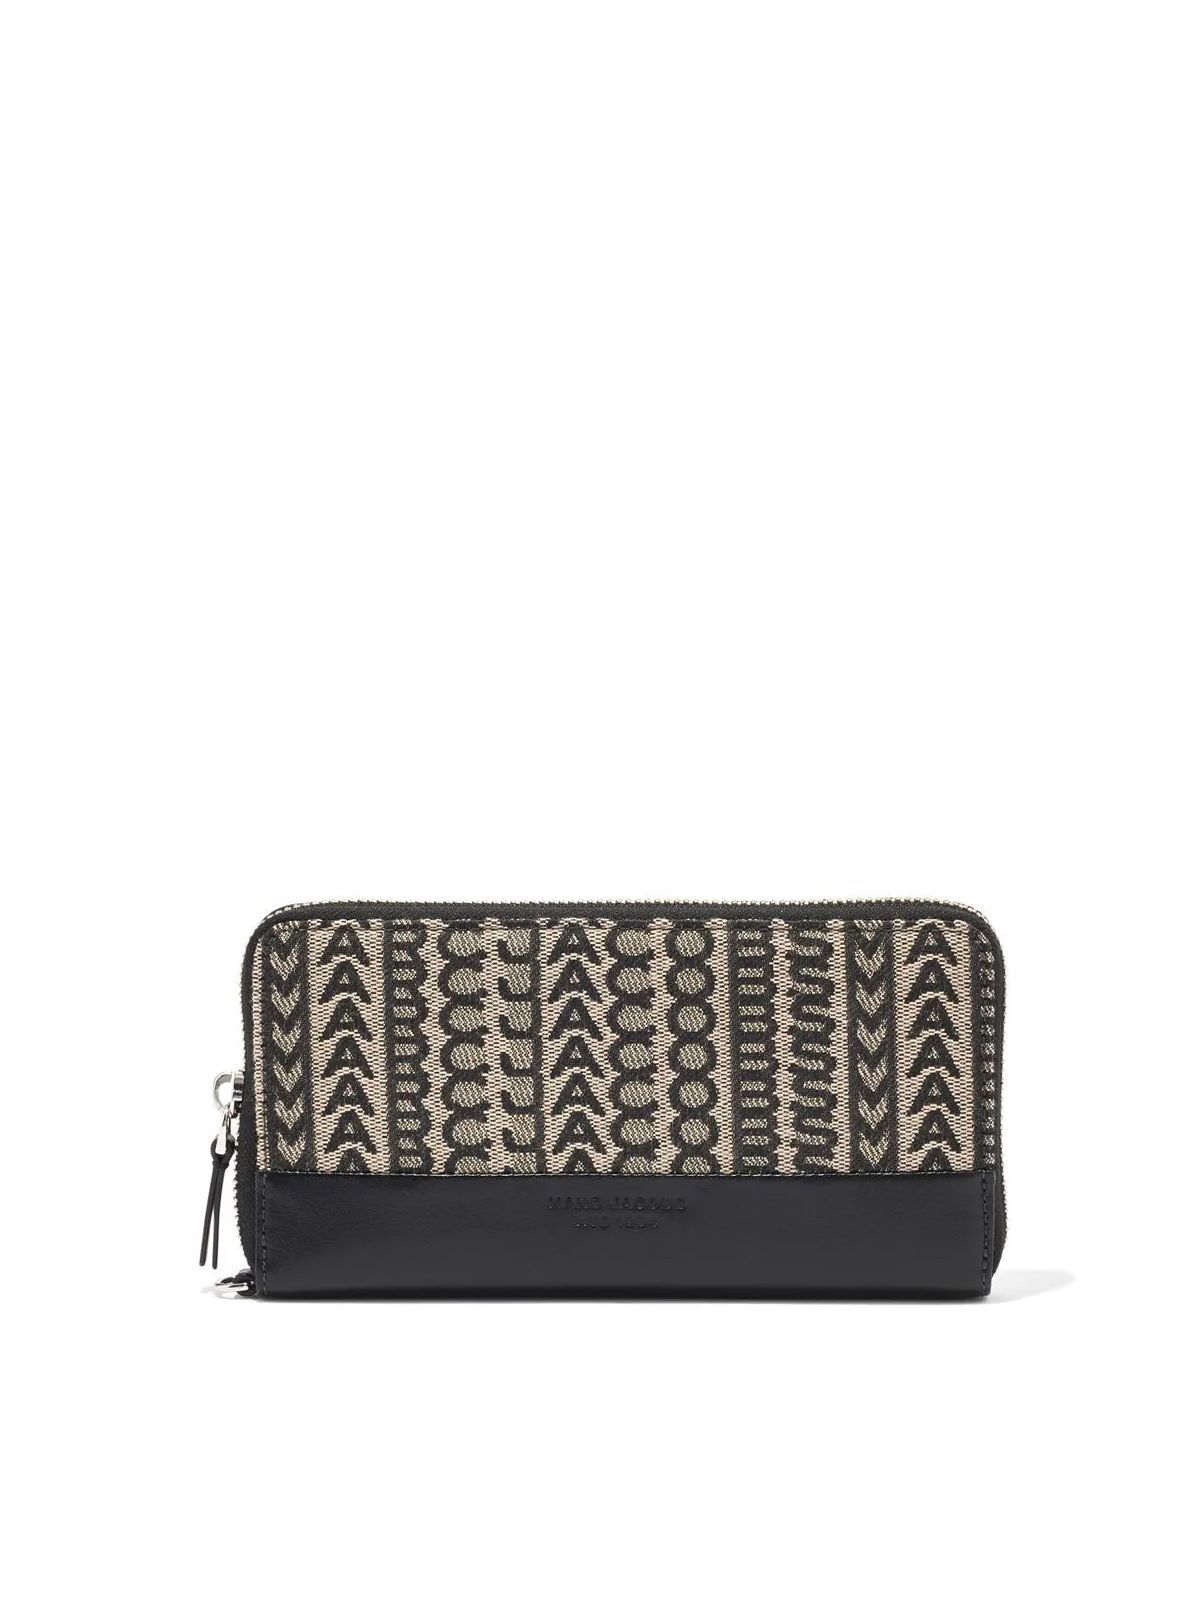 Marc Jacobs The Continental Wristlet In Beige Multi